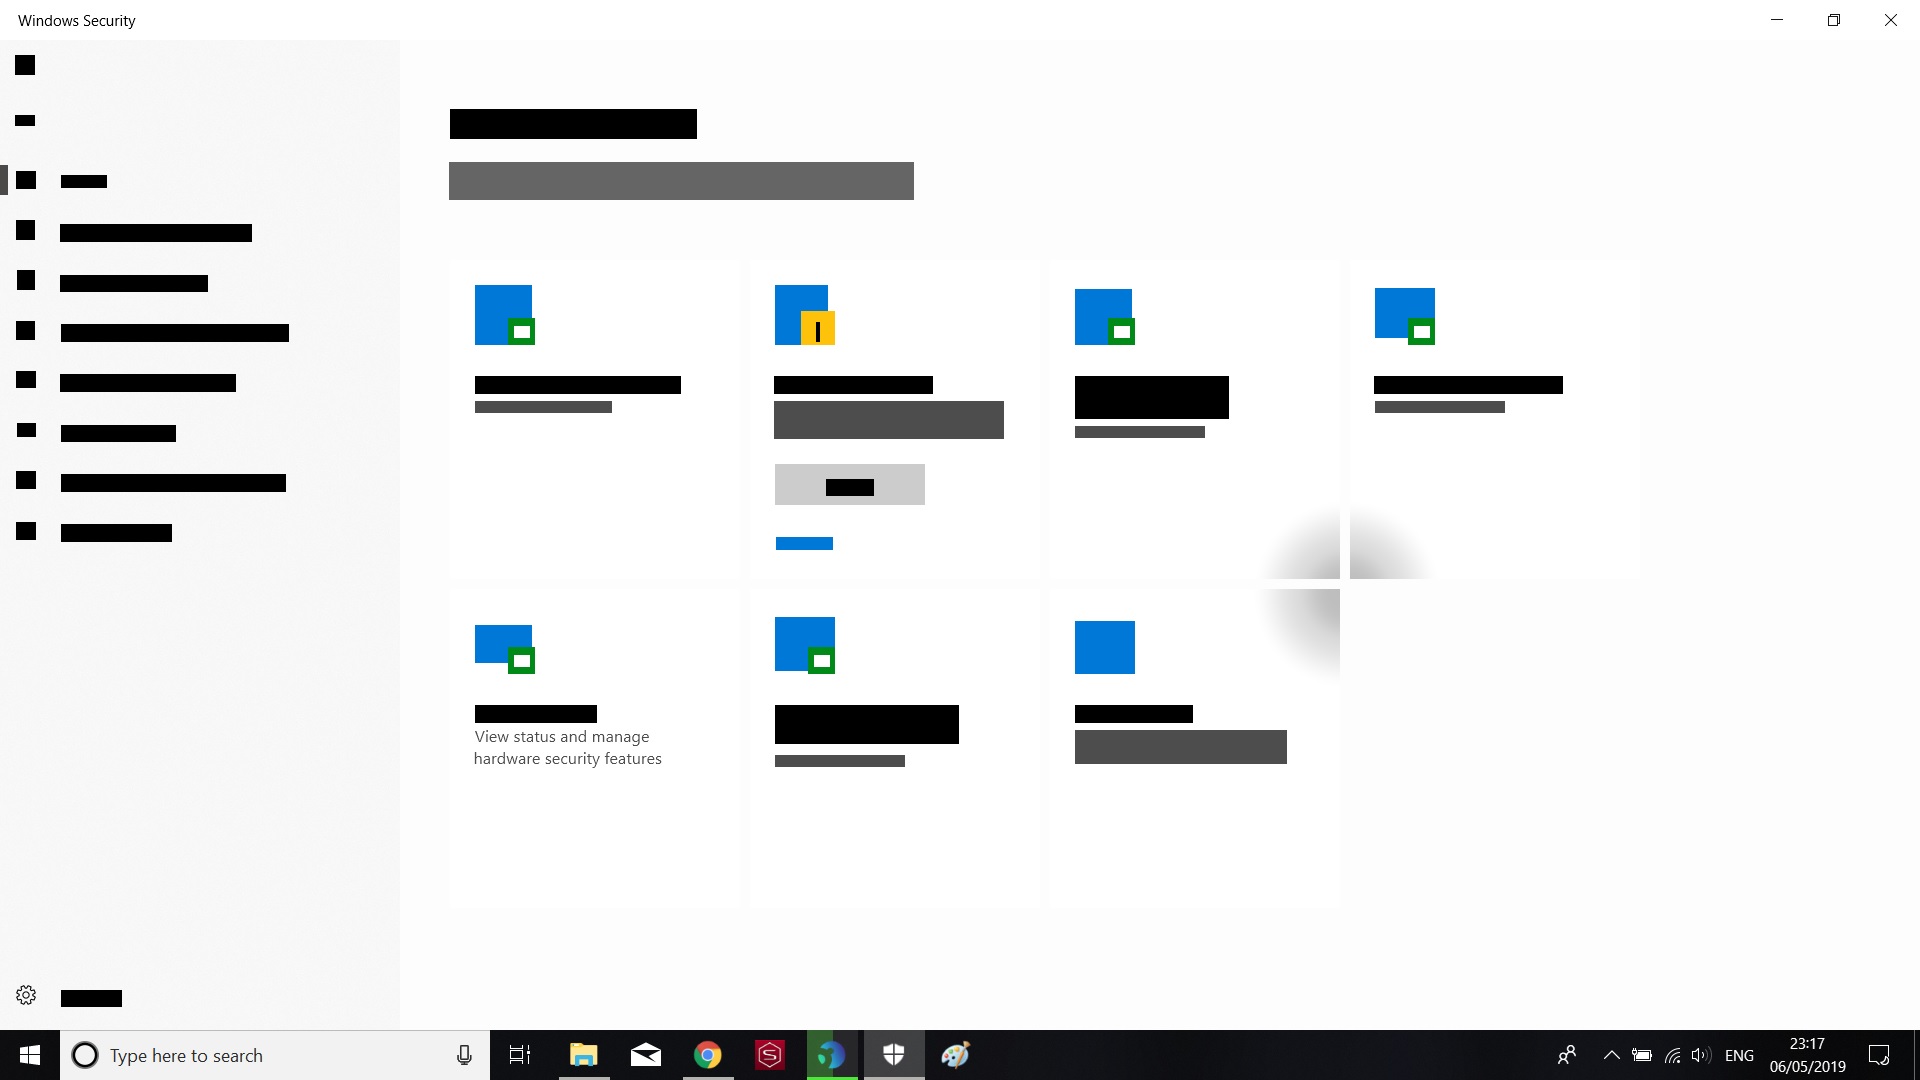 Black squares are blocking out parts of text in windows 10 after factory reset 9563a6f1-4e1a-4c29-8976-b210170a3c16?upload=true.jpg